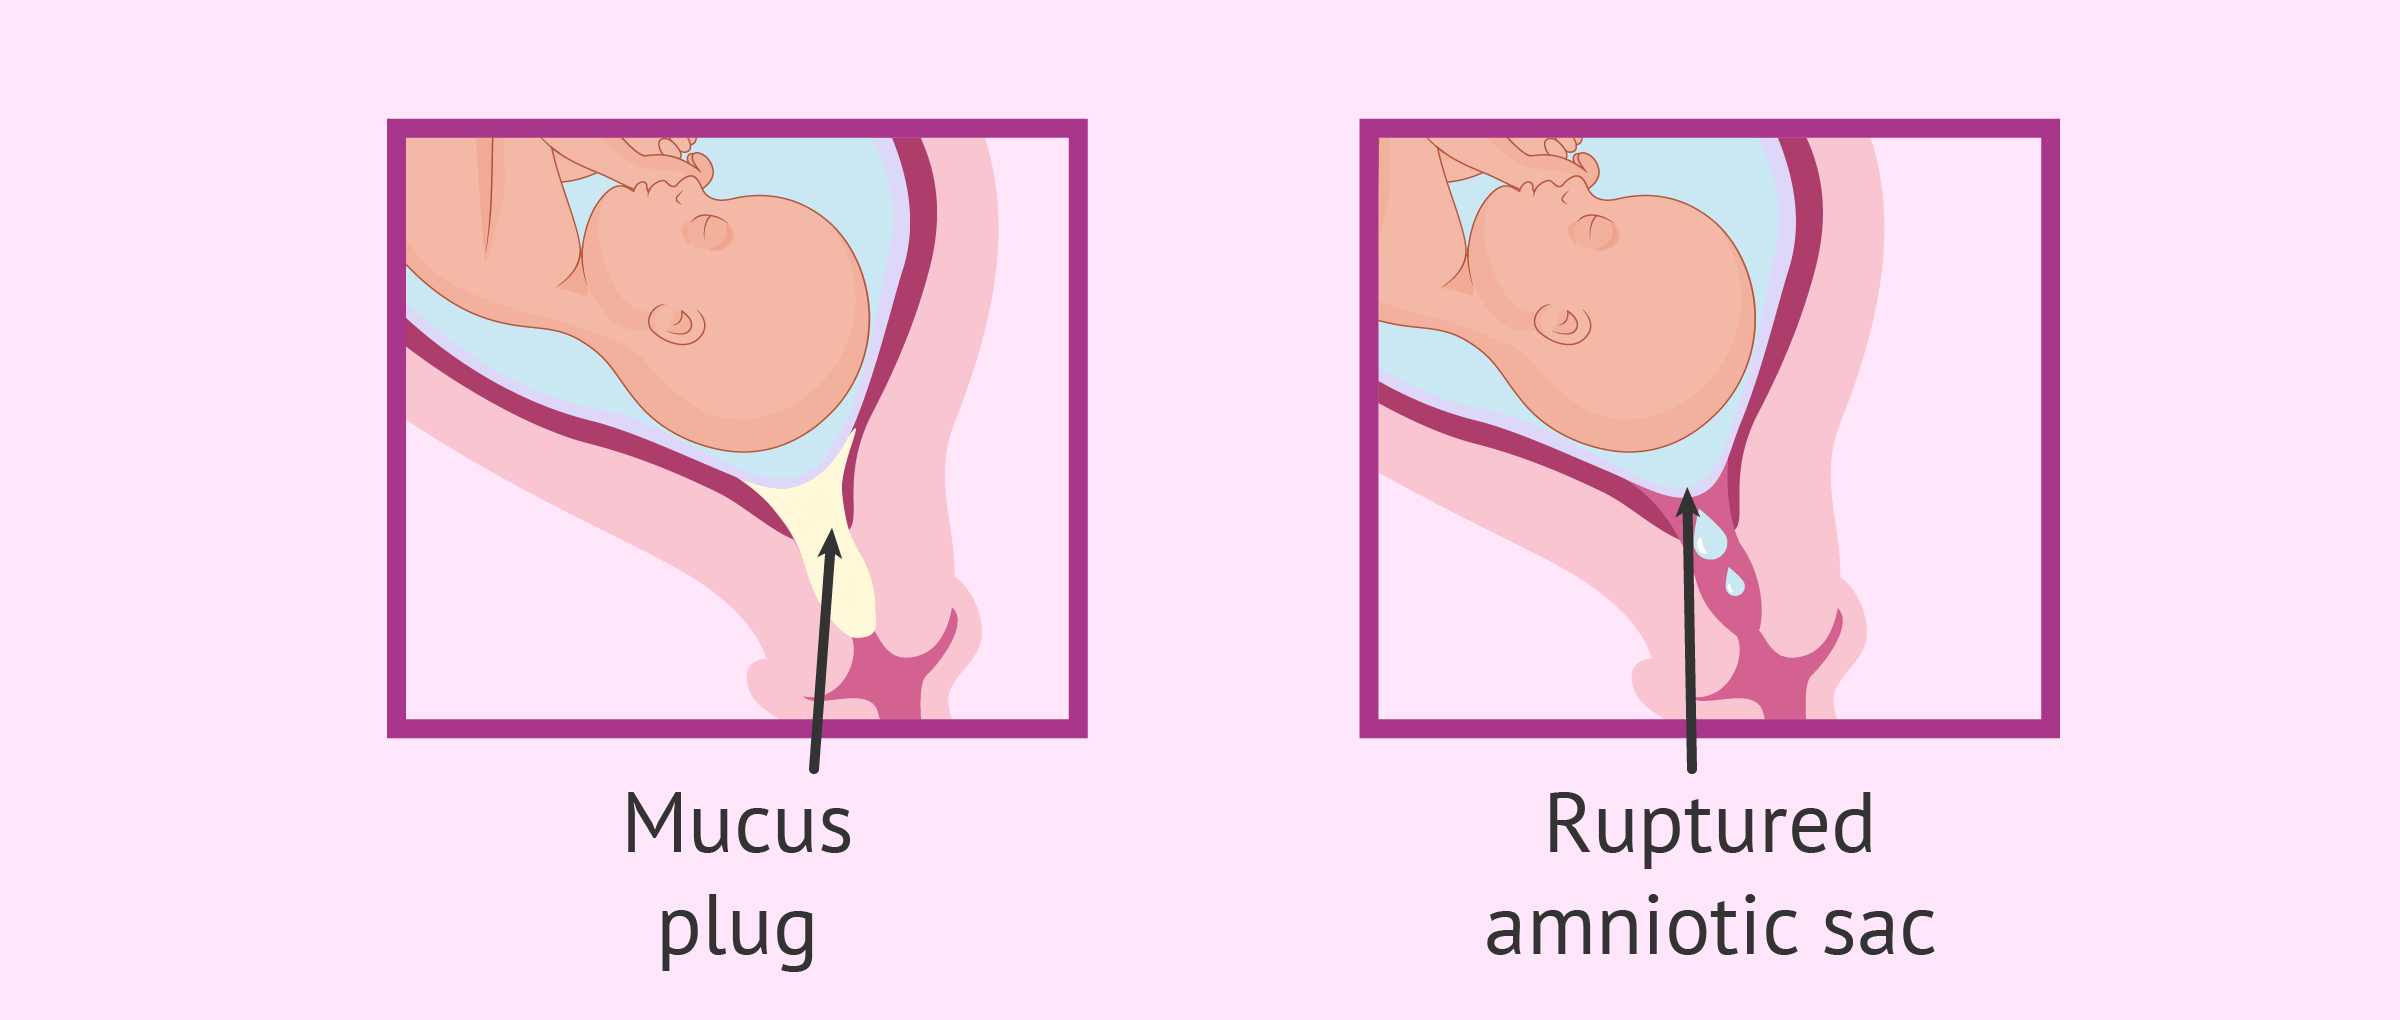 Leaking Amniotic Fluid: Signs, Causes, and Symptoms